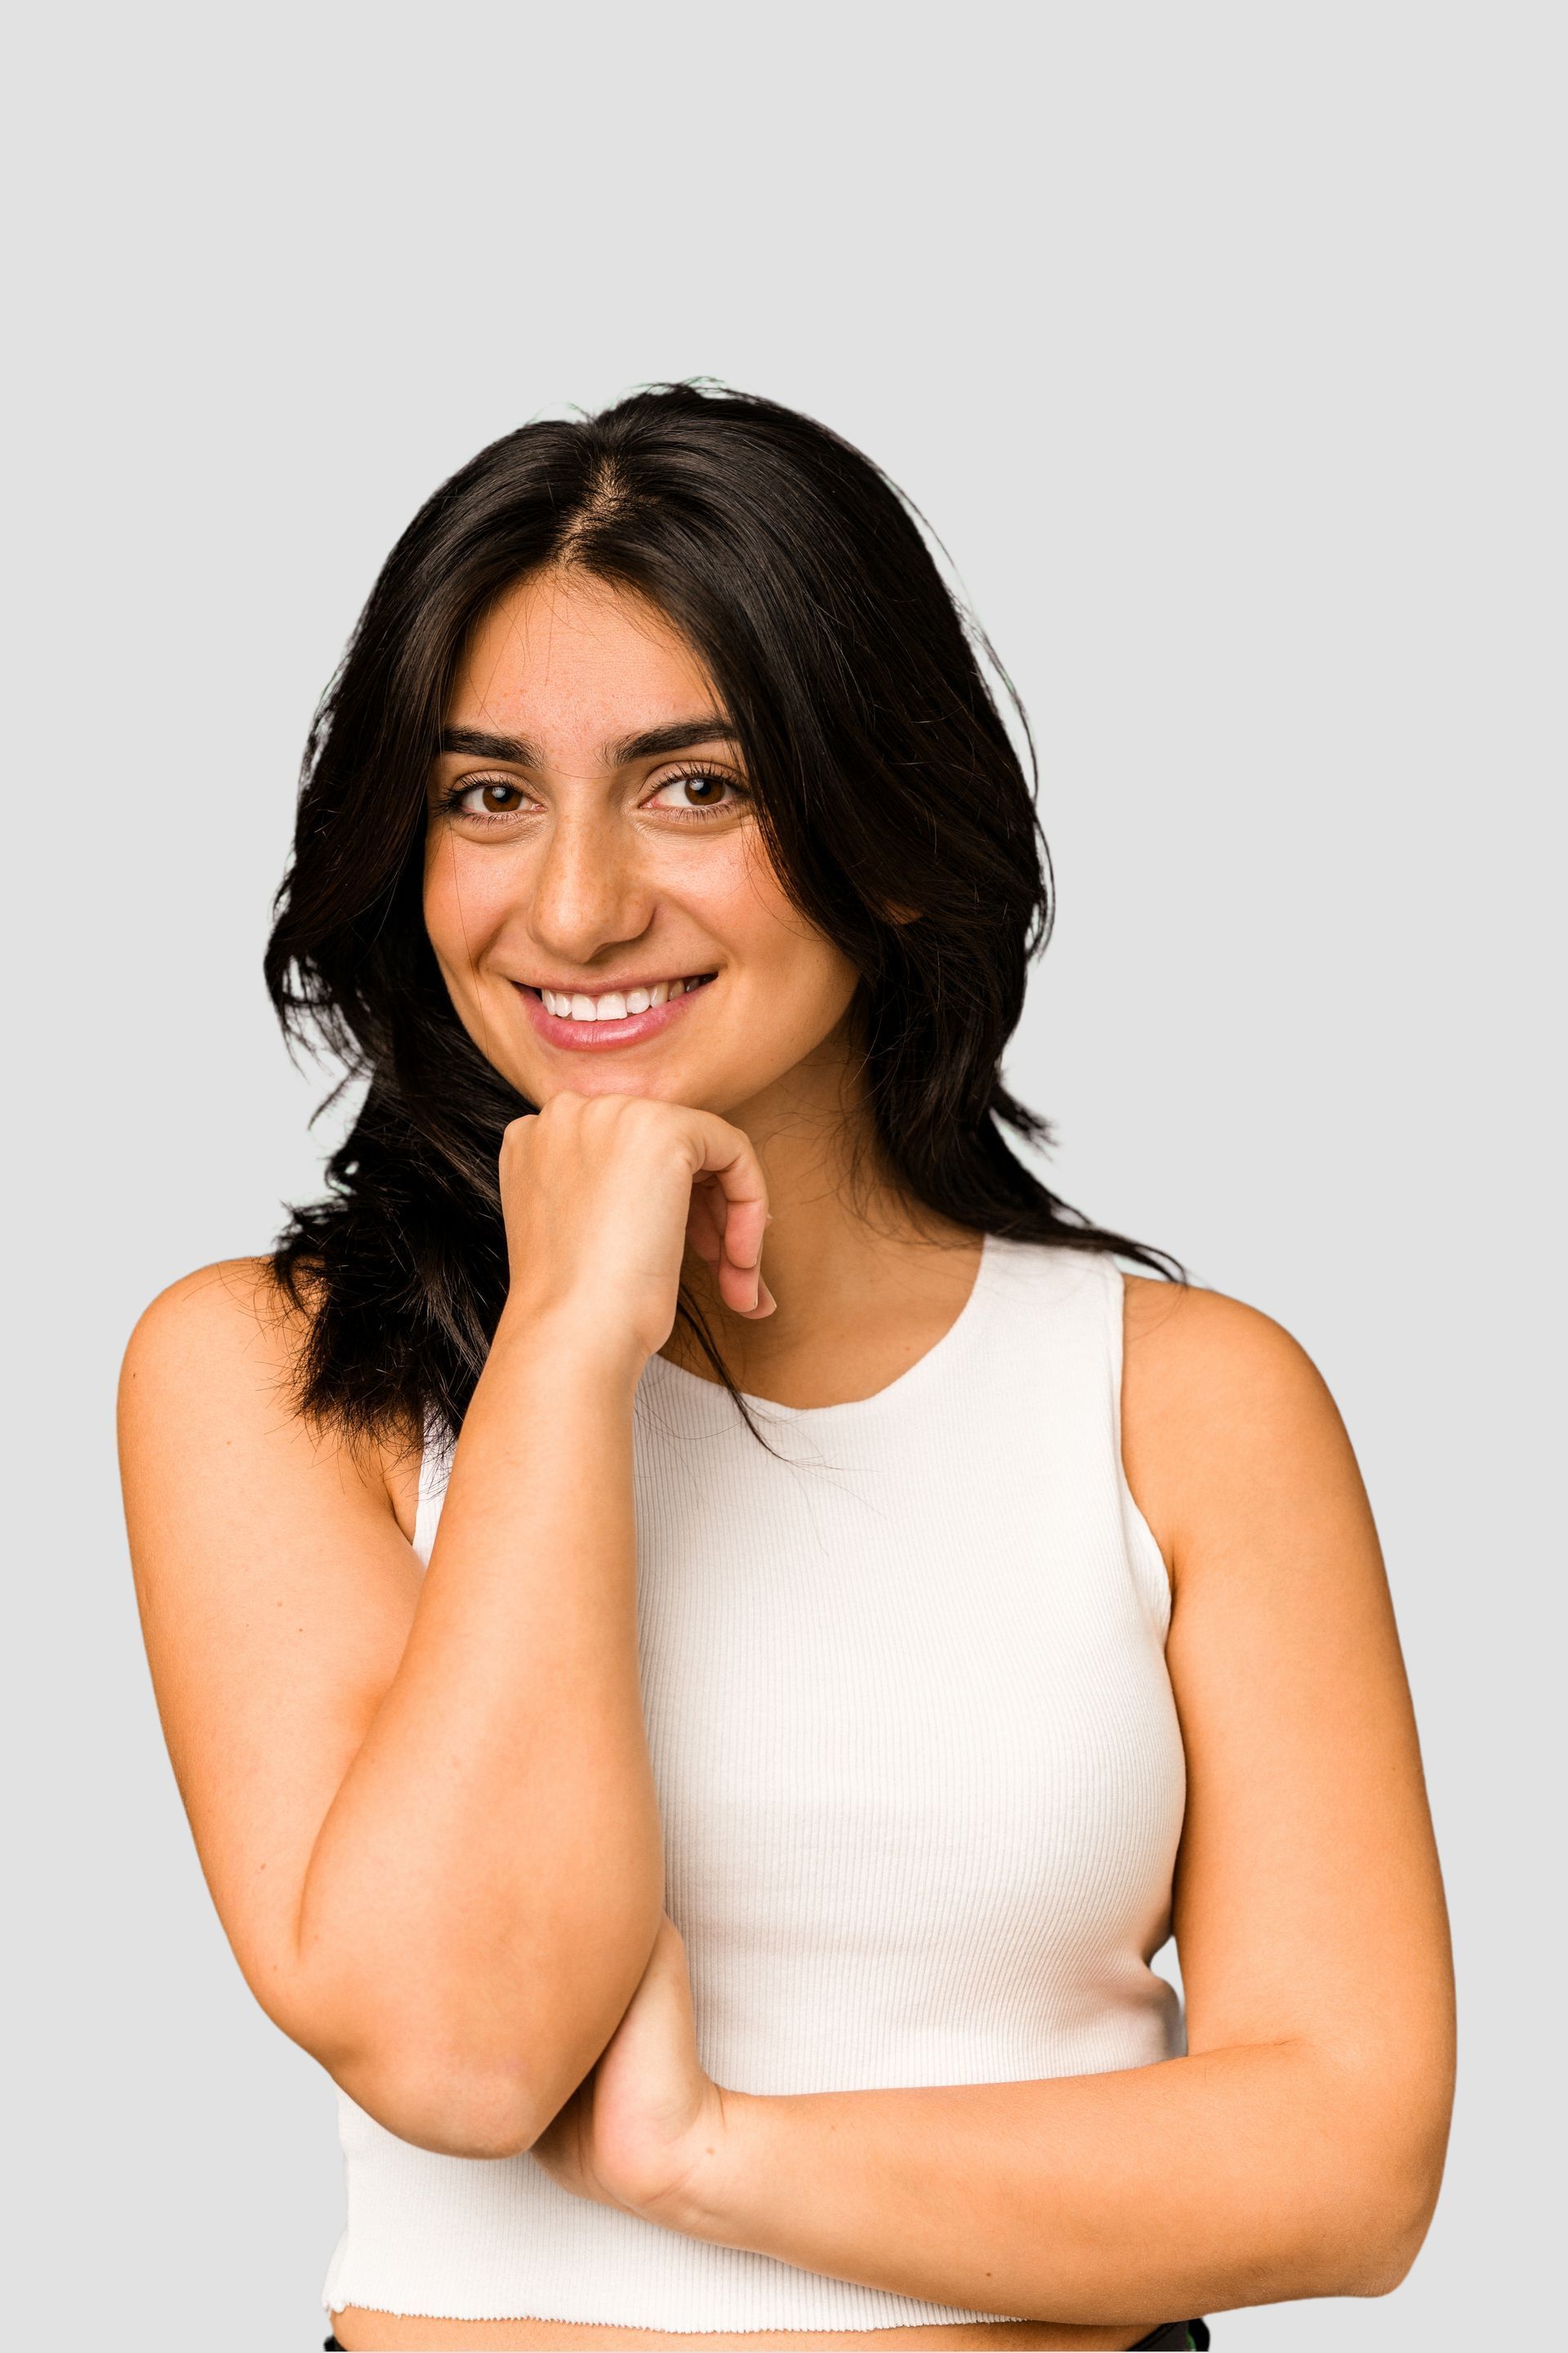 a woman in a white tank top smiles with her hand on her chin